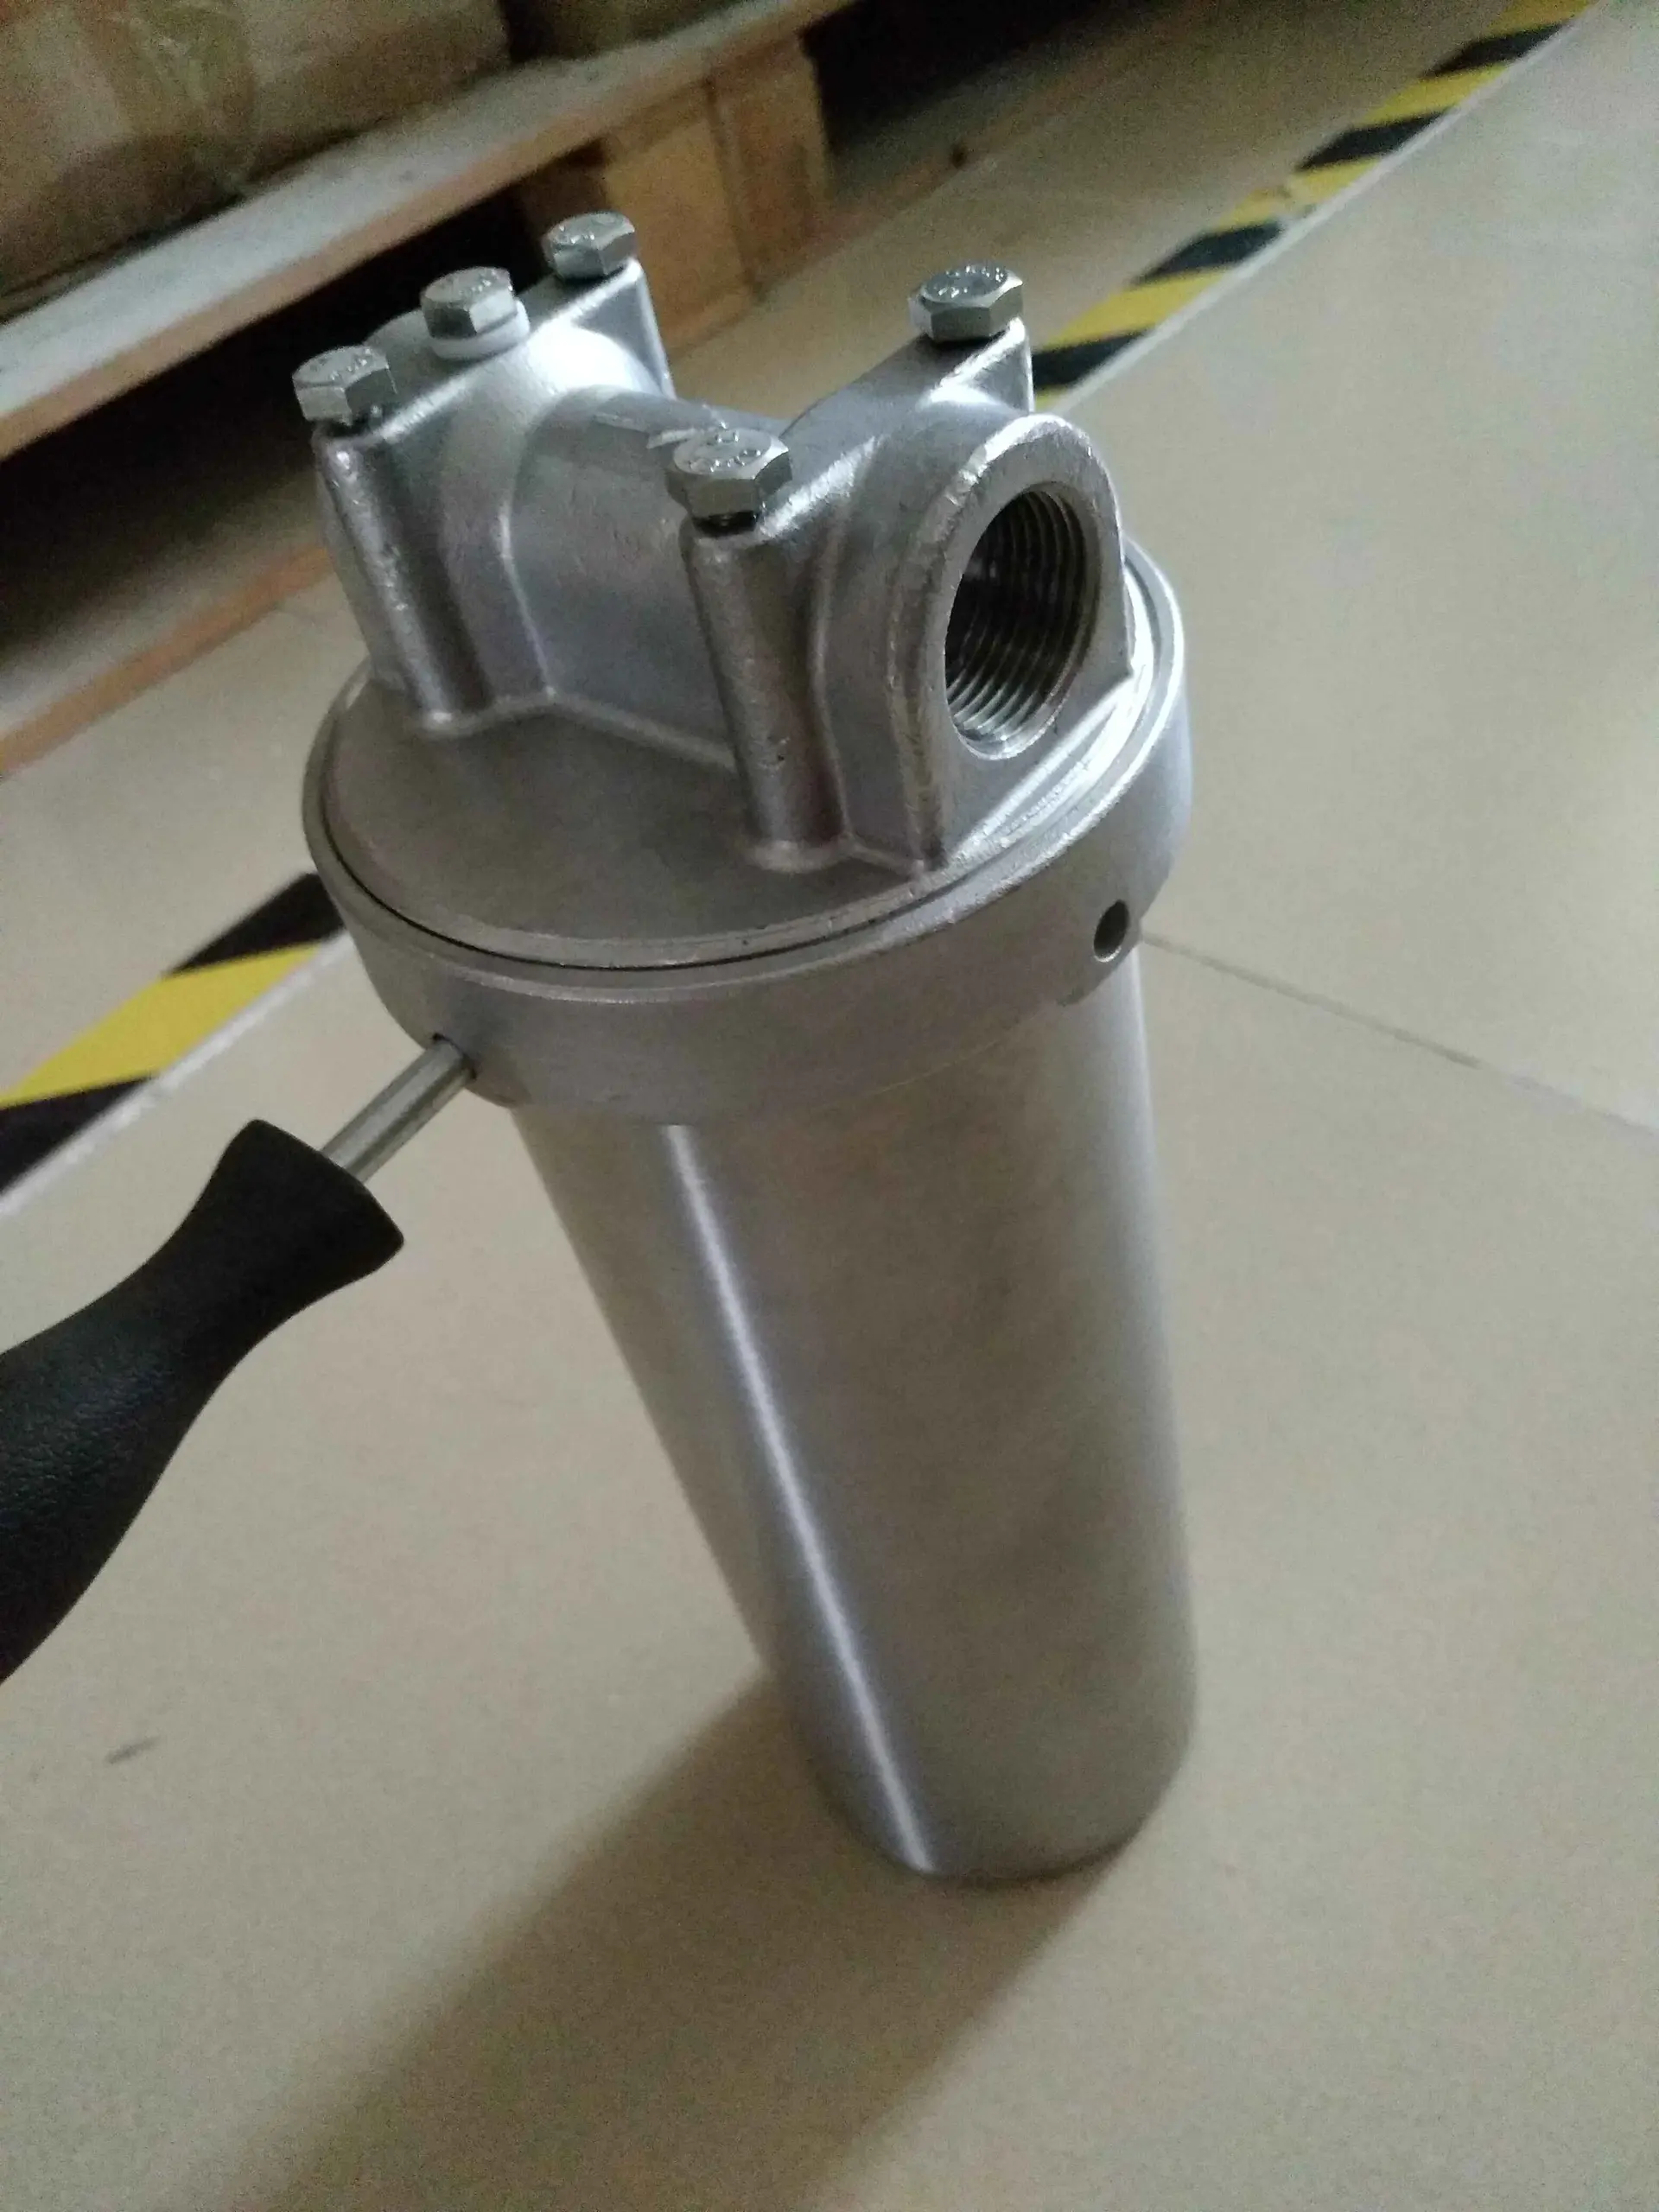 Residential Domestic Under Sink Stainless Steel Vessel Housing Hot Water Filter for home use purifier